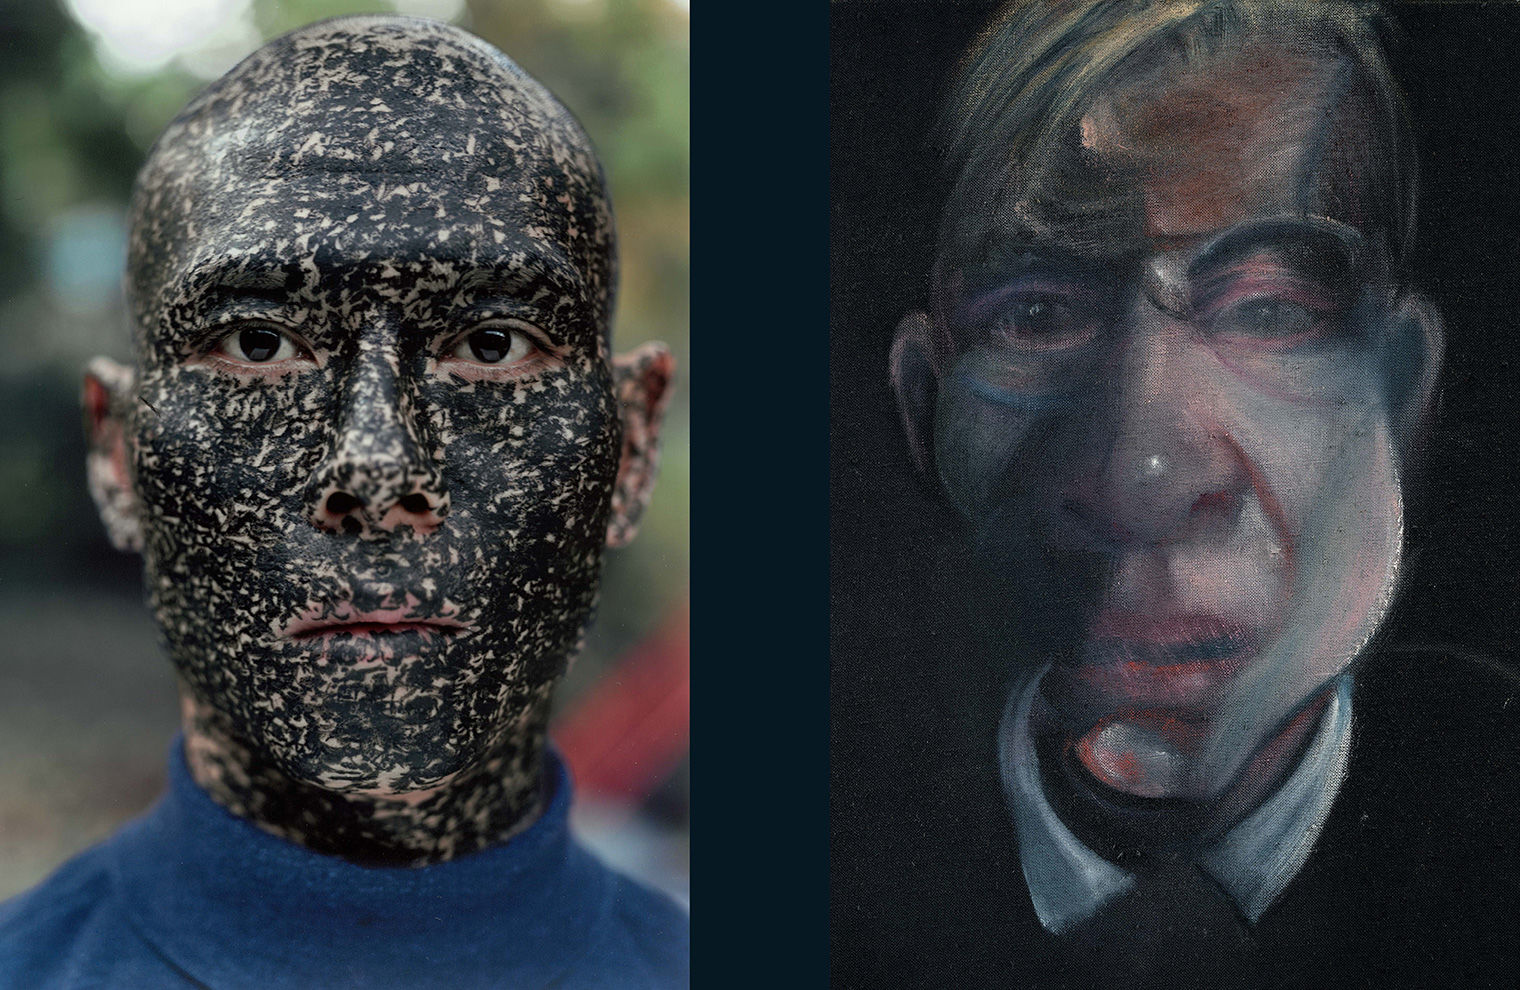 At left, portrait of a figure whose face, scalp, ears, and neck are covered in dark ink. They wear a blue turtleneck. At right, a portrait of a man with exaggerated large features, a swoop of hair, and a white collar, distorted like a fun house mirror.